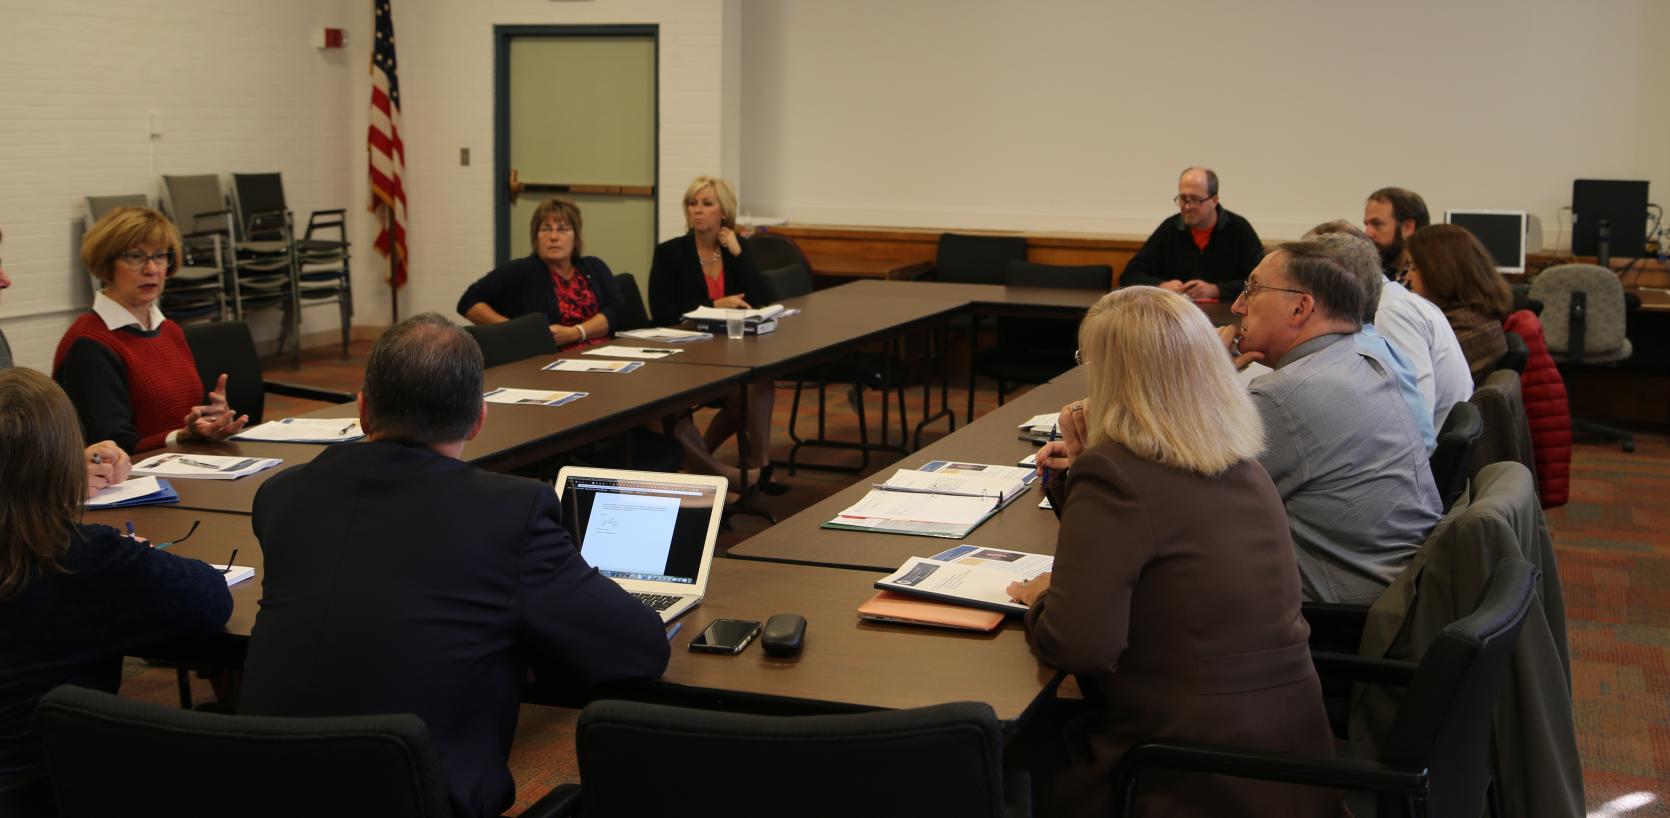 State Auditor Suzanne M. Bump (left) discusses the finding and recommendations contained in her office’s analysis of the Massachusetts regional school district structure with representatives from the Wachusett Regional School District.